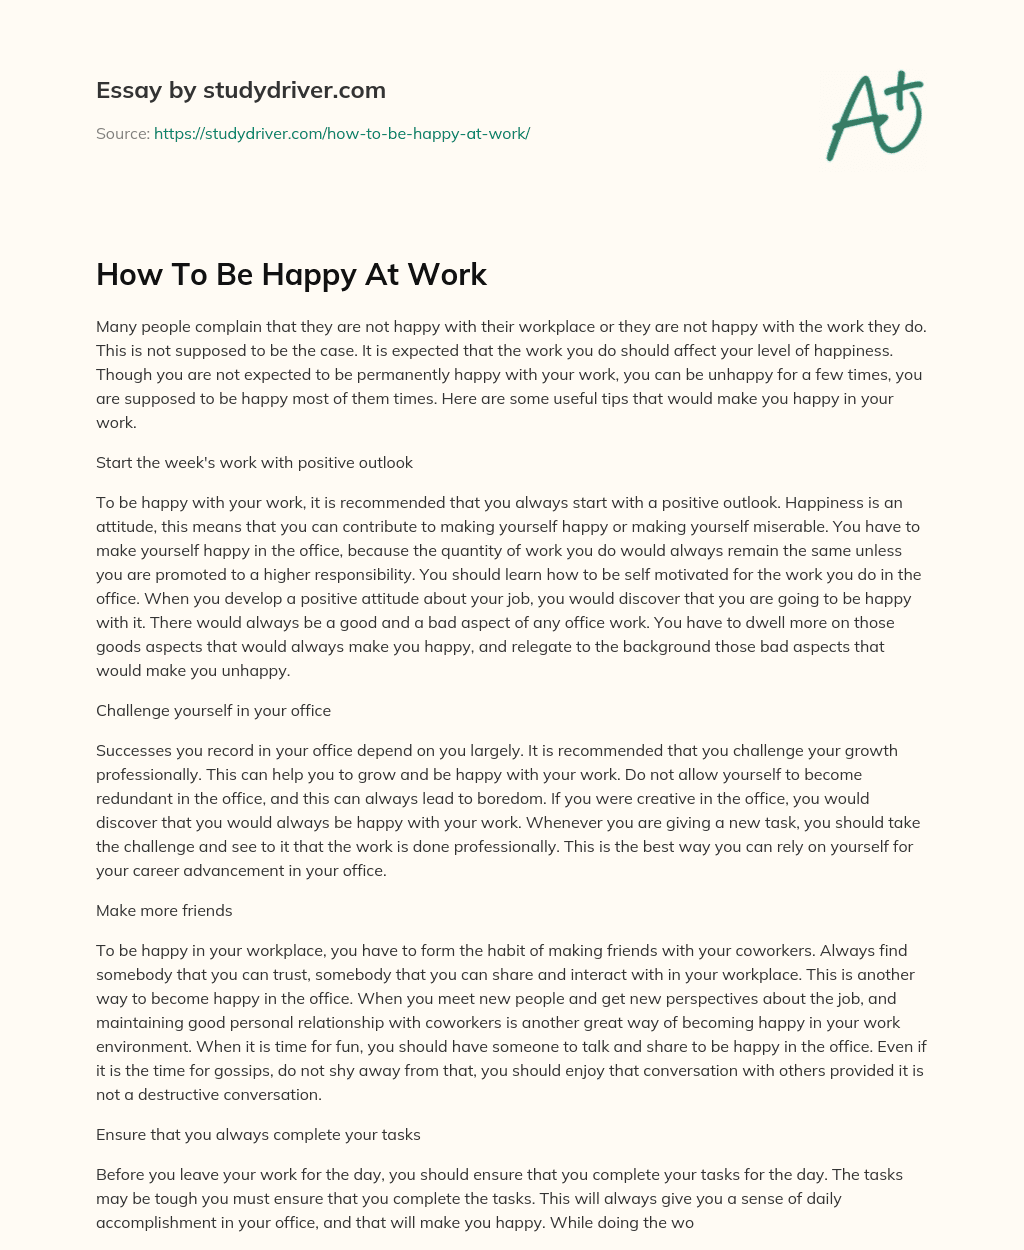 How to be Happy at Work essay